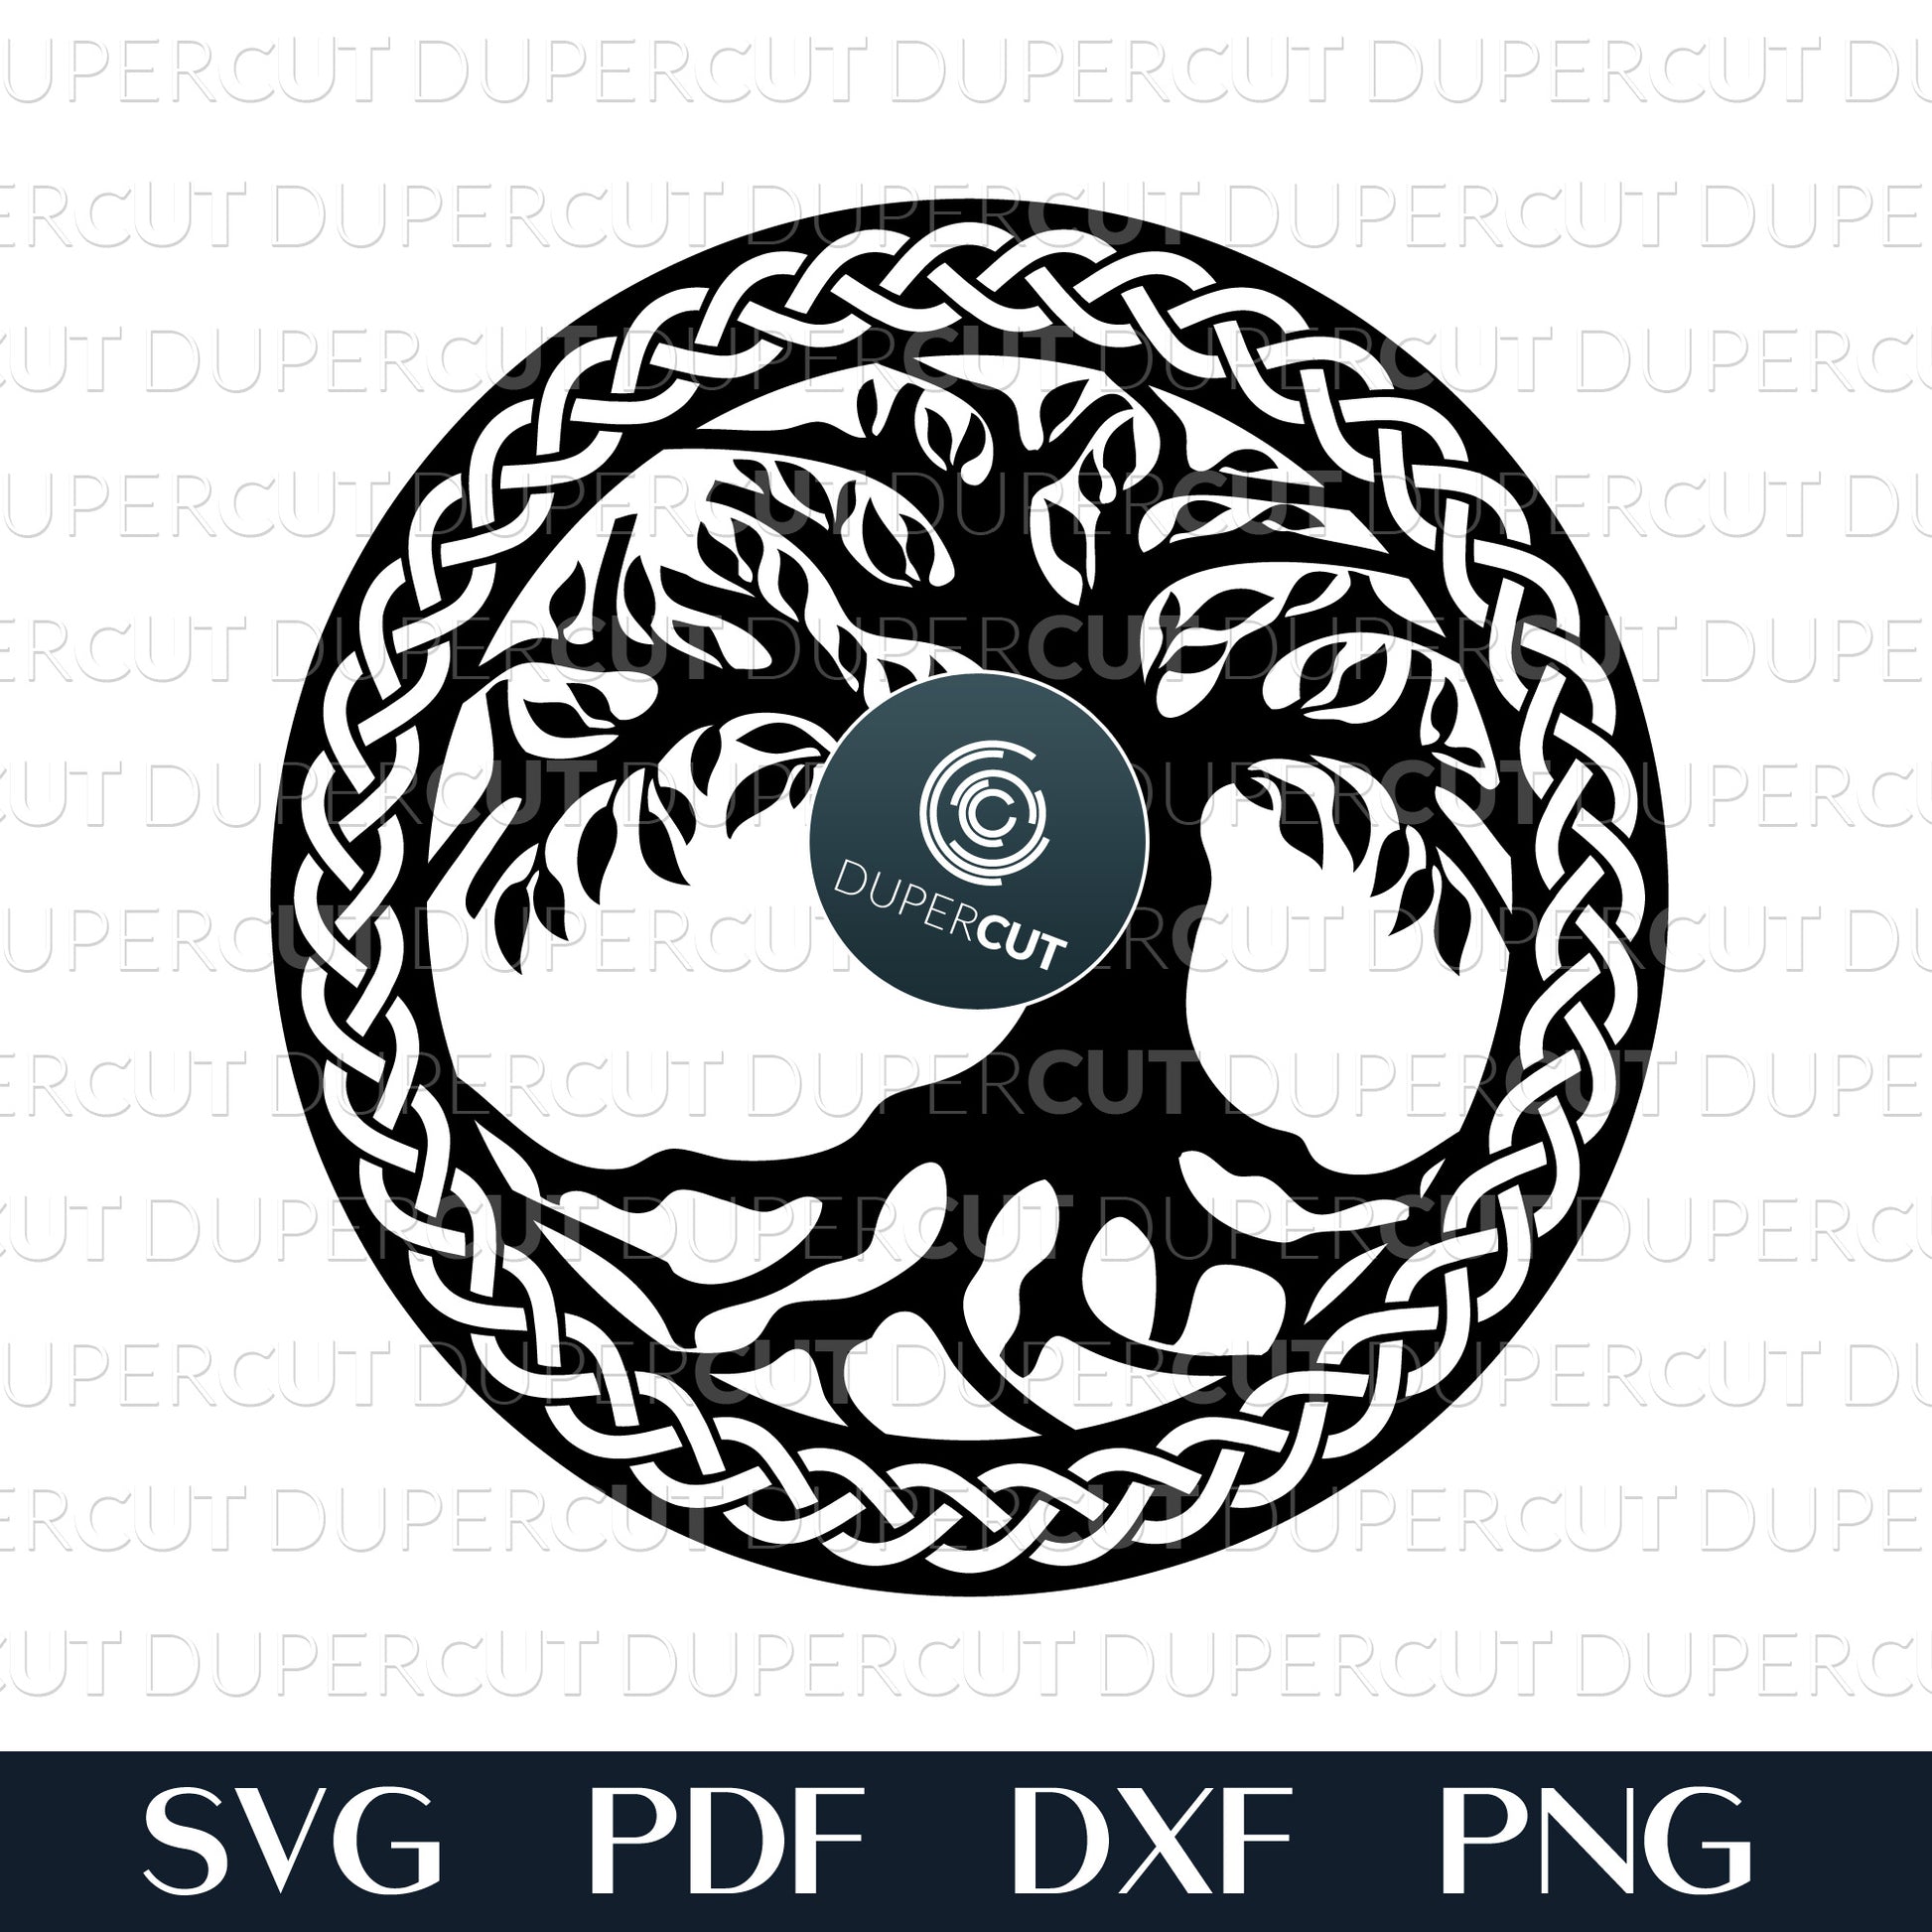 Celtic Tree of life silhouette, SVG PNG DXF files for cutting, laser engraving, scrapbooking. For use with Cricut, Glowforge, Silhouette, CNC machines.